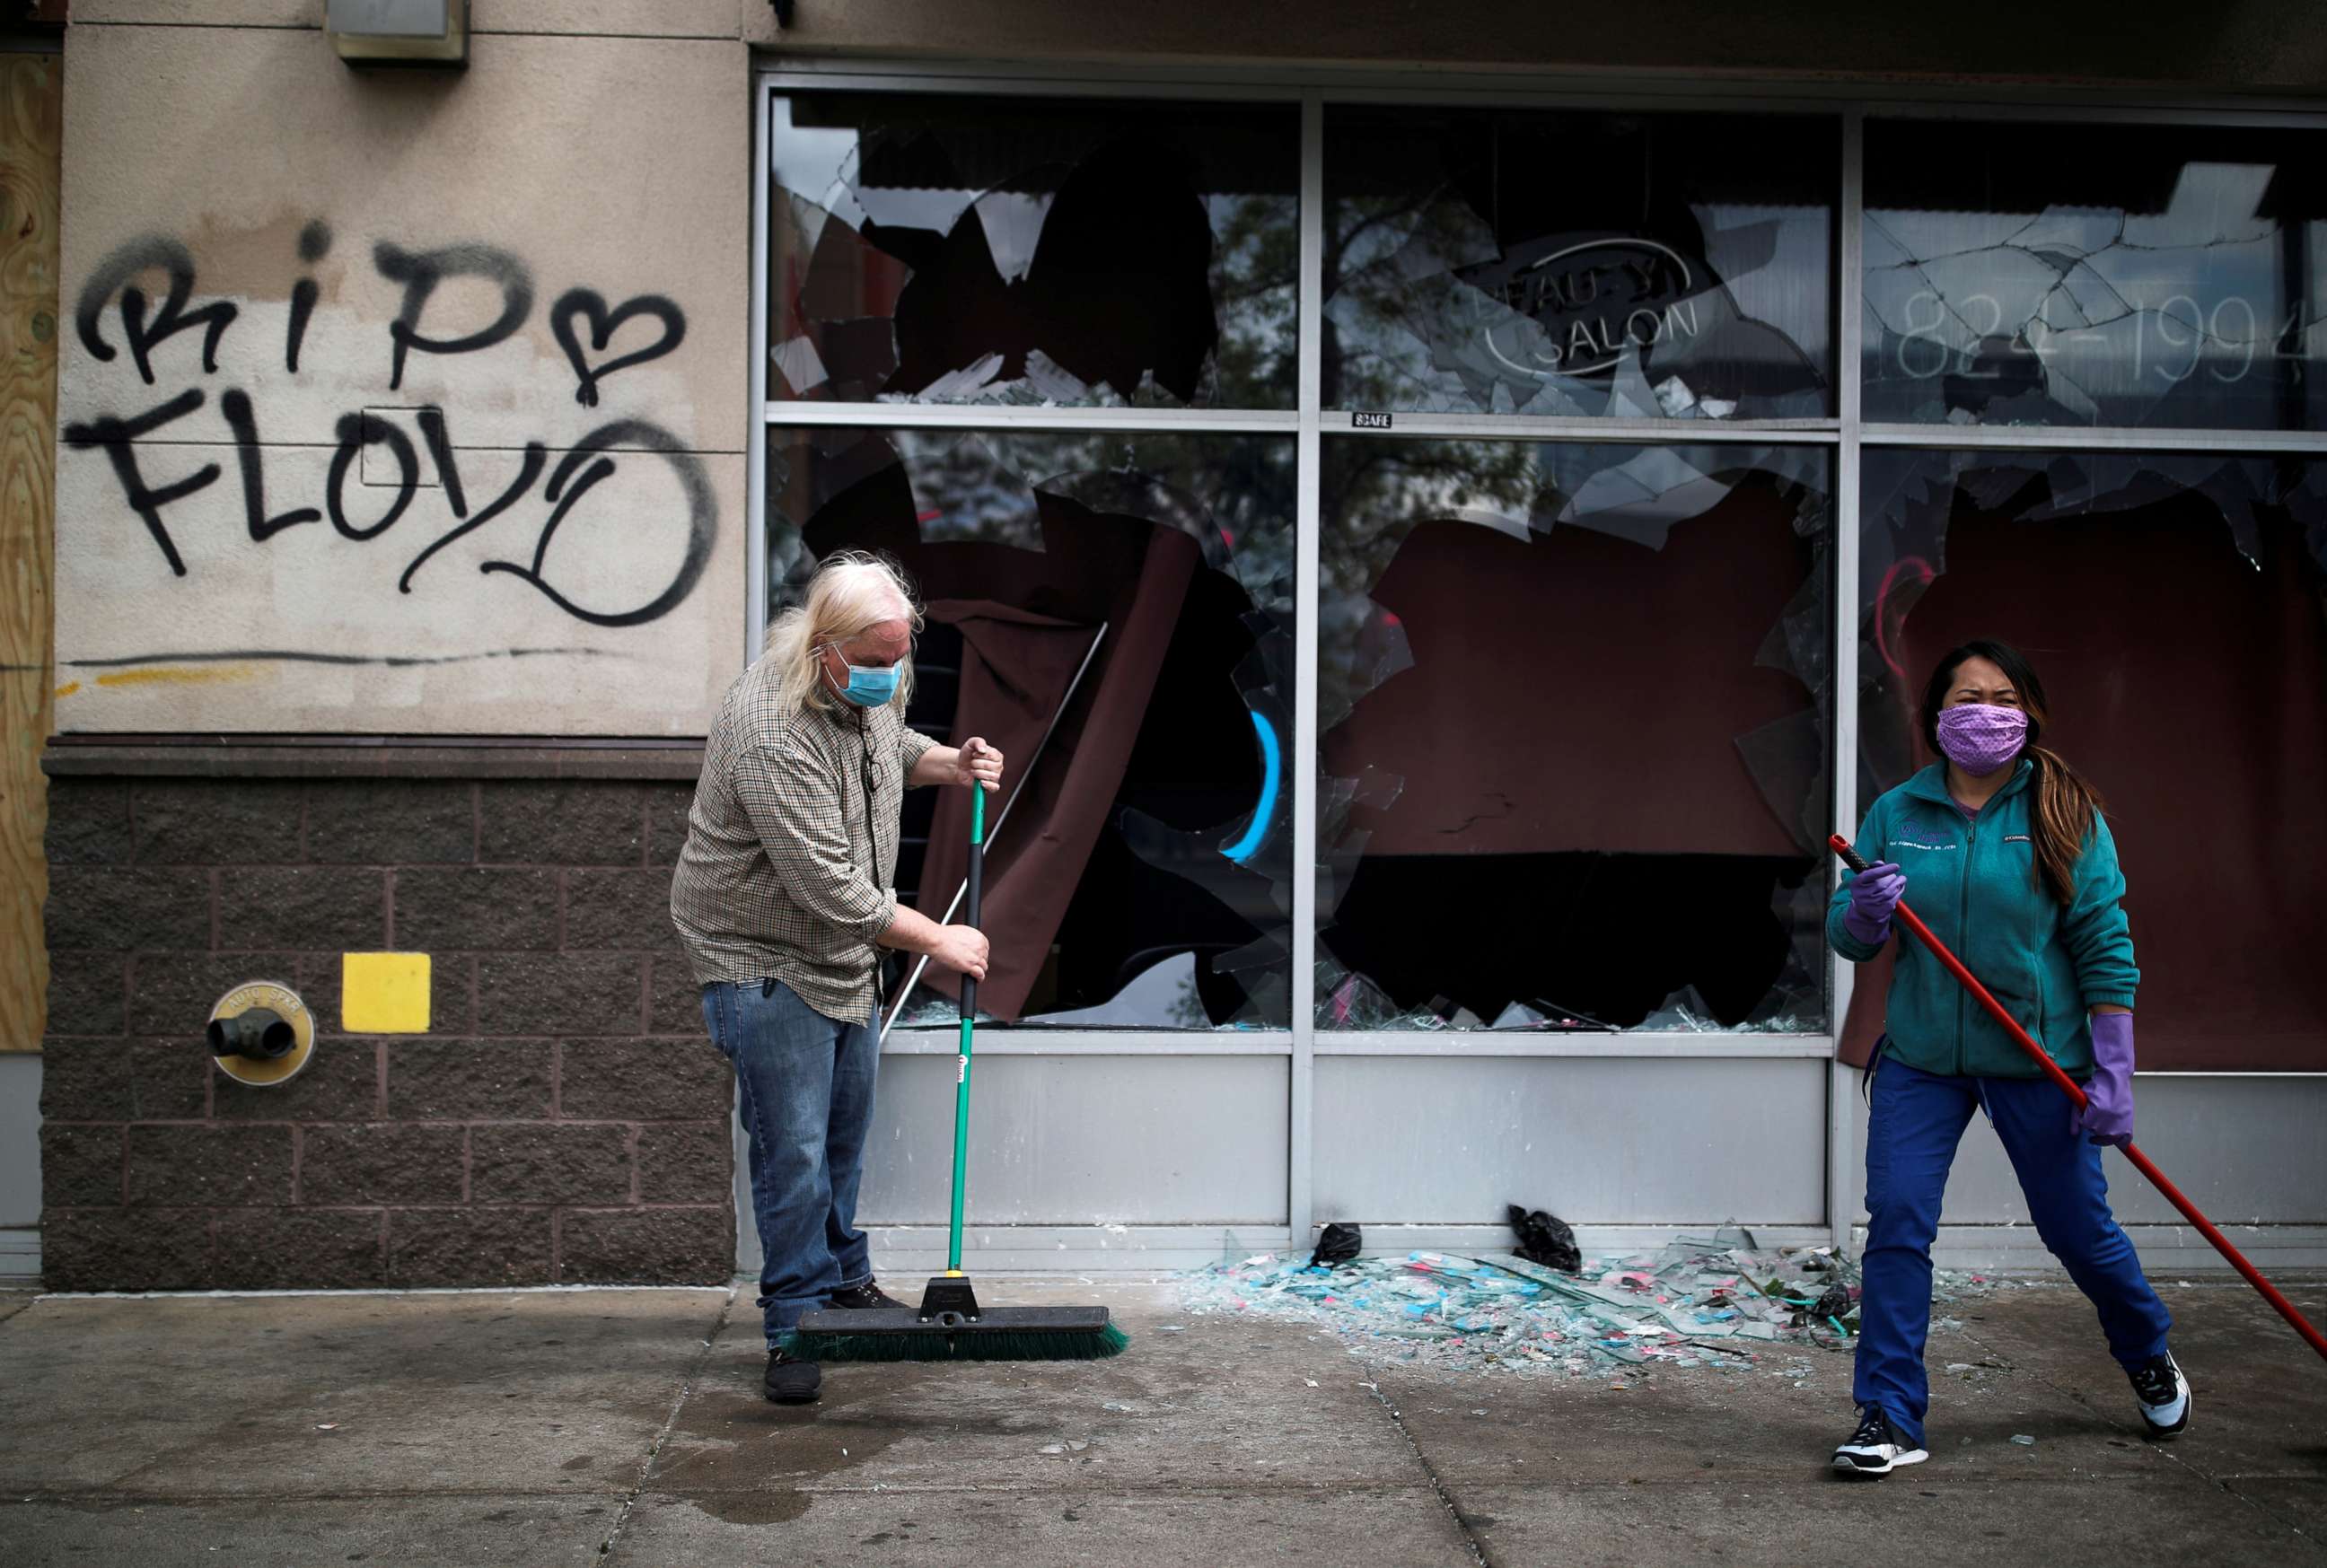 PHOTO: People clean up outside a local business in the aftermath of a protest after in Minneapolis, Minnesota, May 29, 2020.